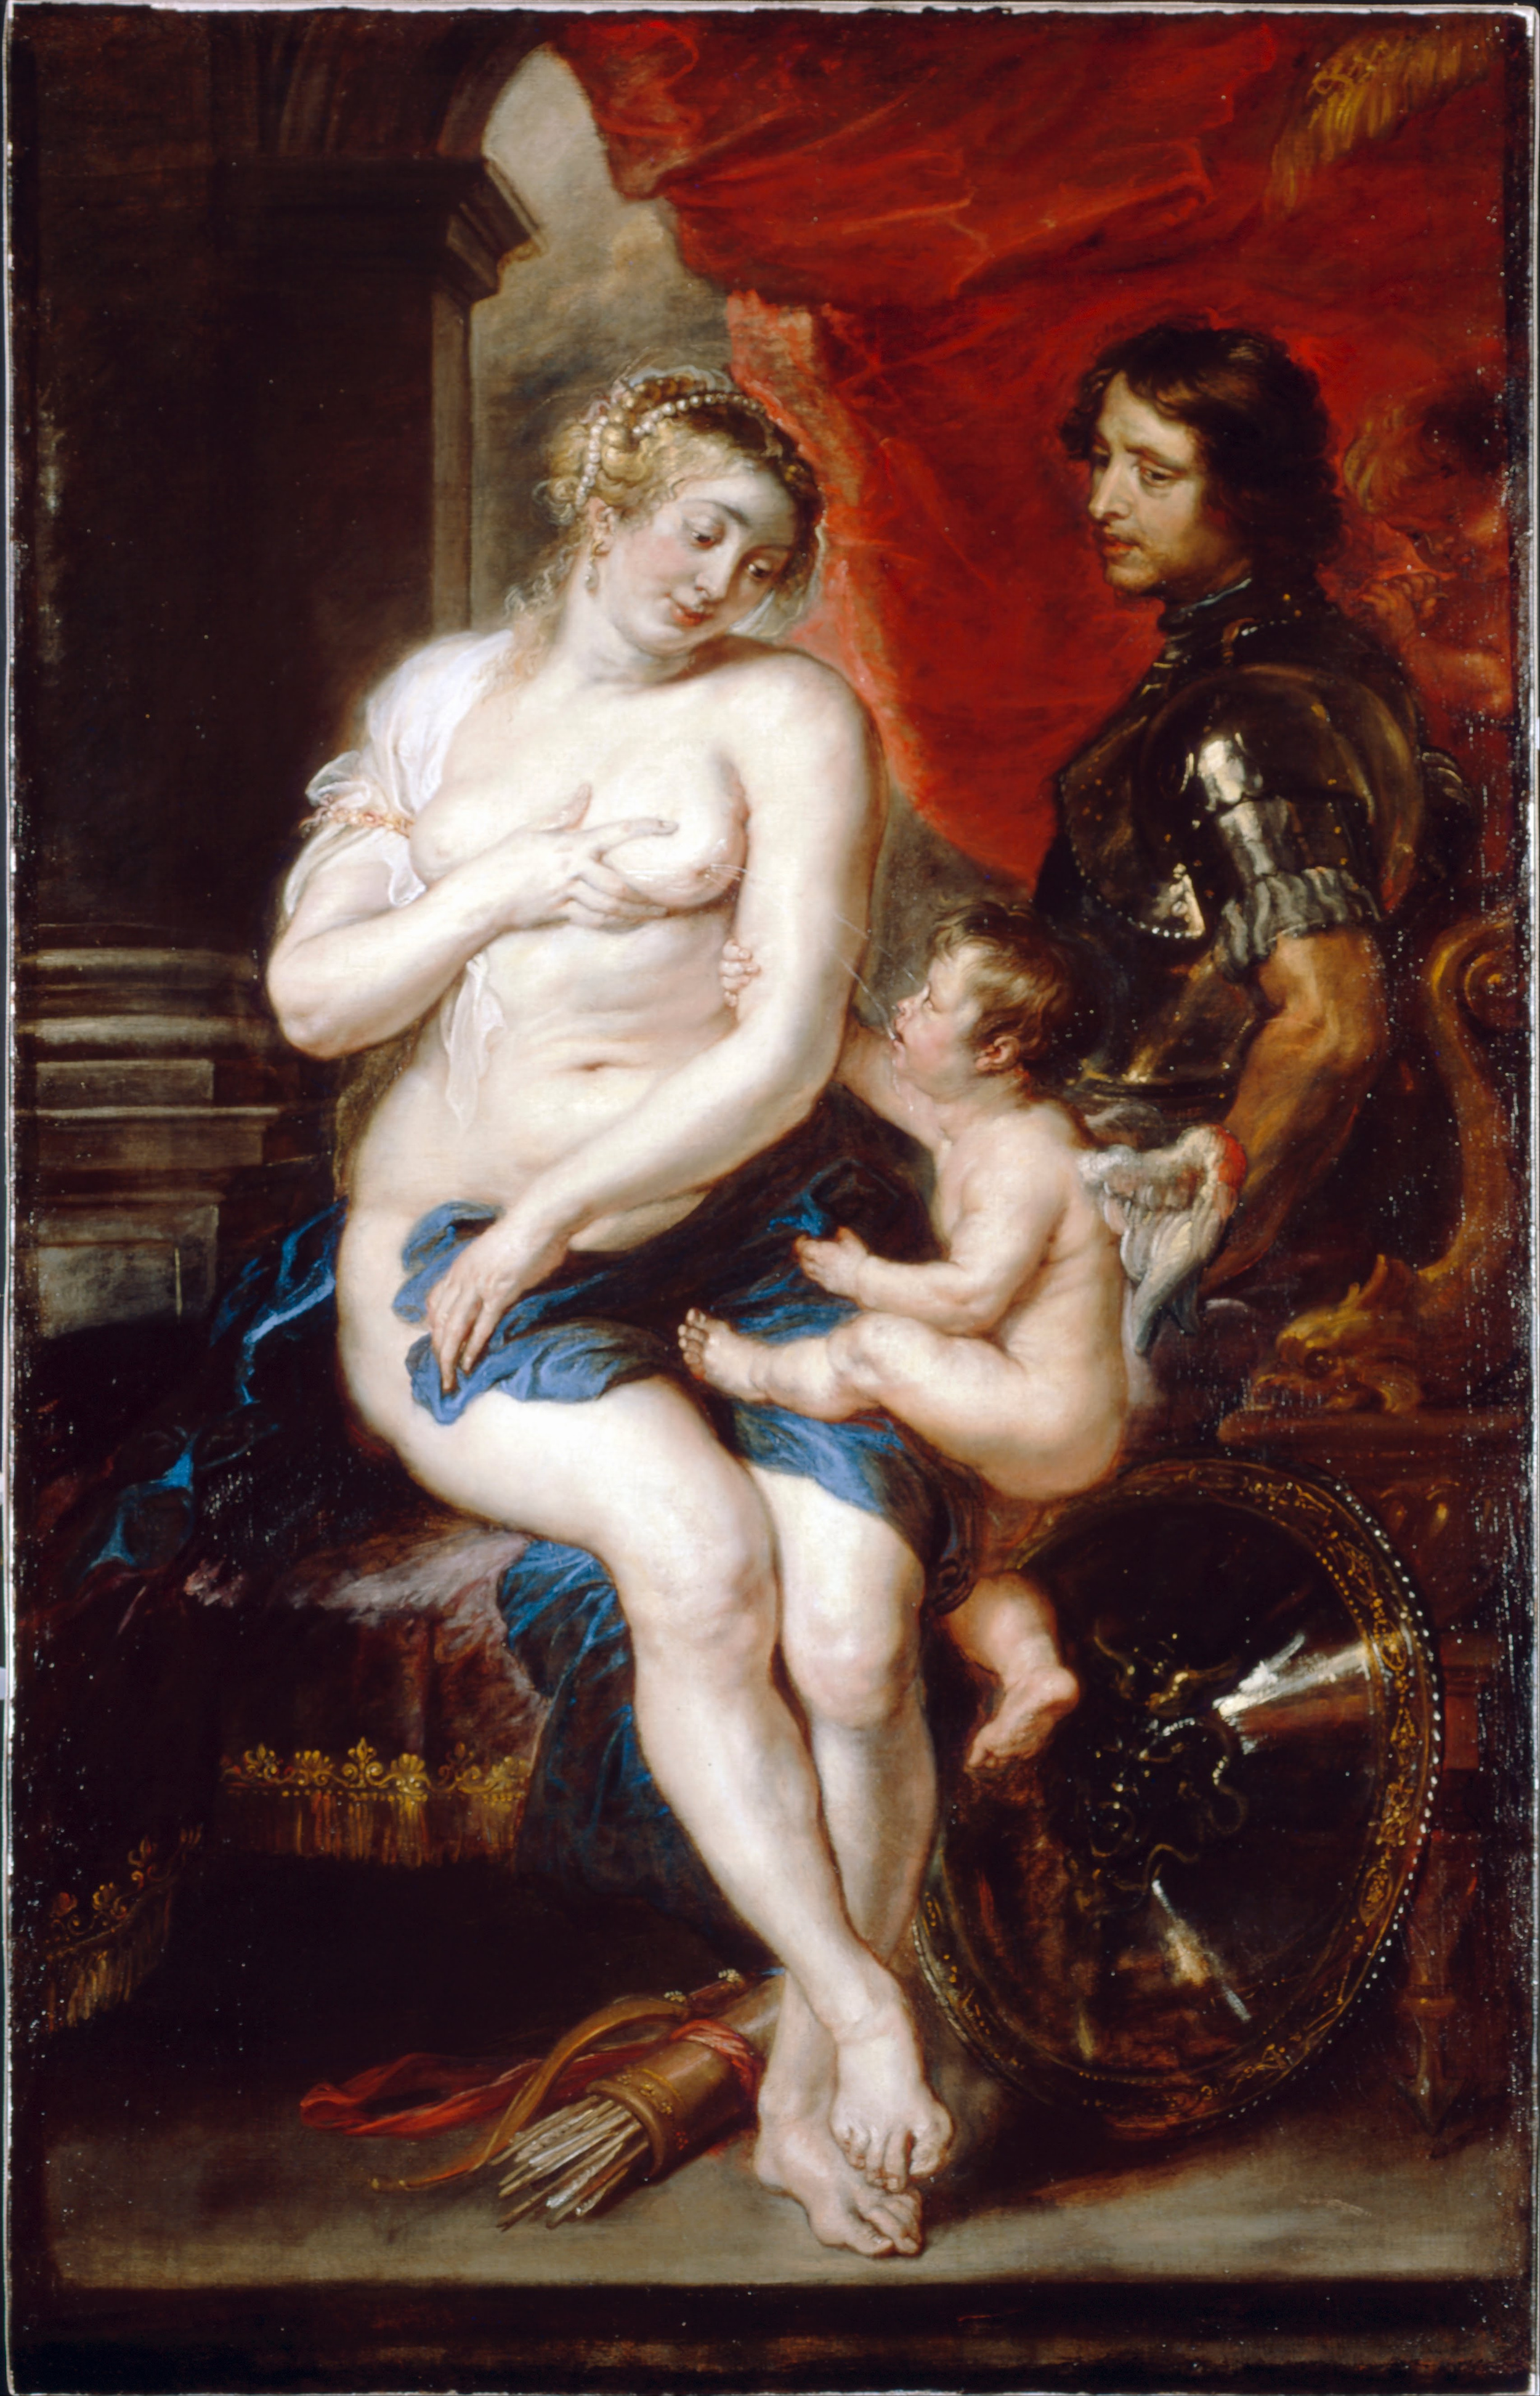 Venus, Marte y Cupido by Peter Paul Rubens - Early to mid-1630s Dulwich Picture Gallery